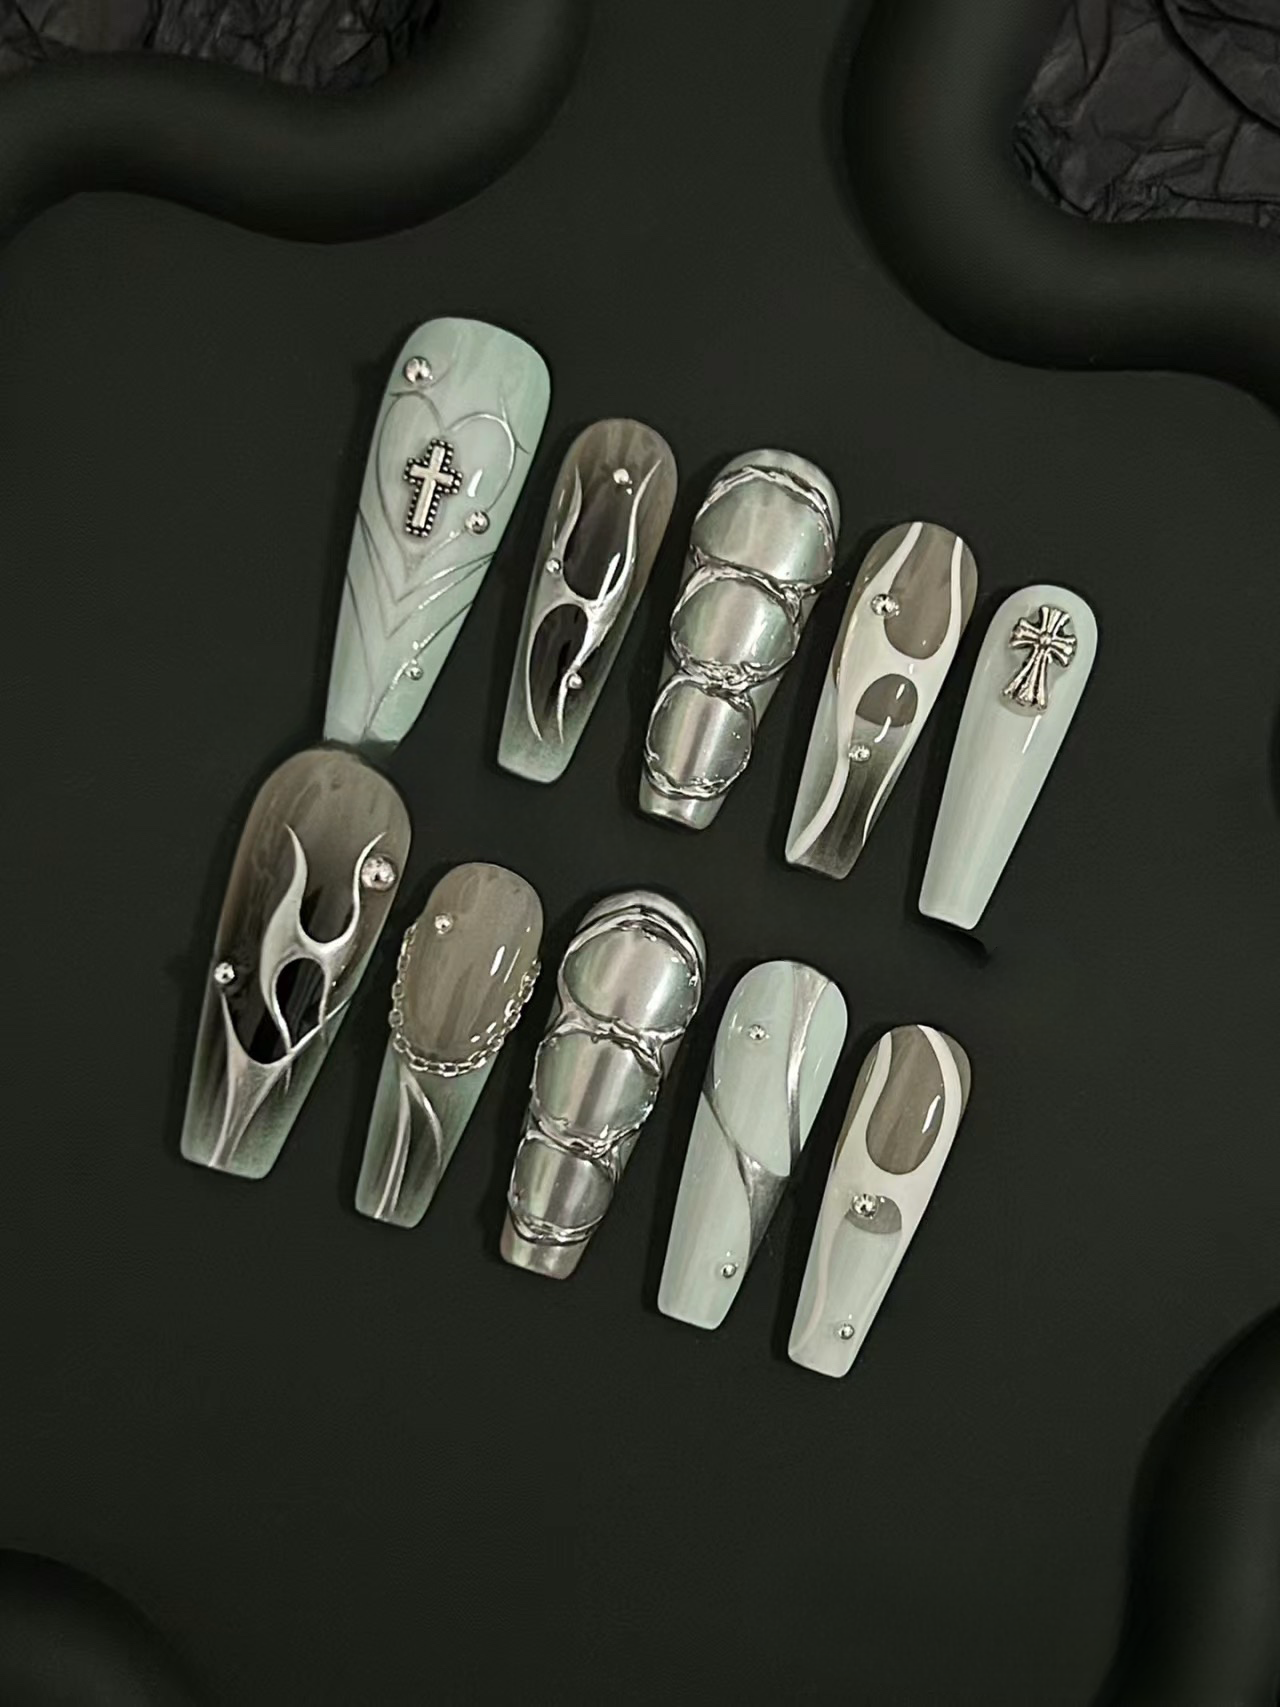 【Hydraulic Sliver Forge】 False Nails from SHOPQAQ